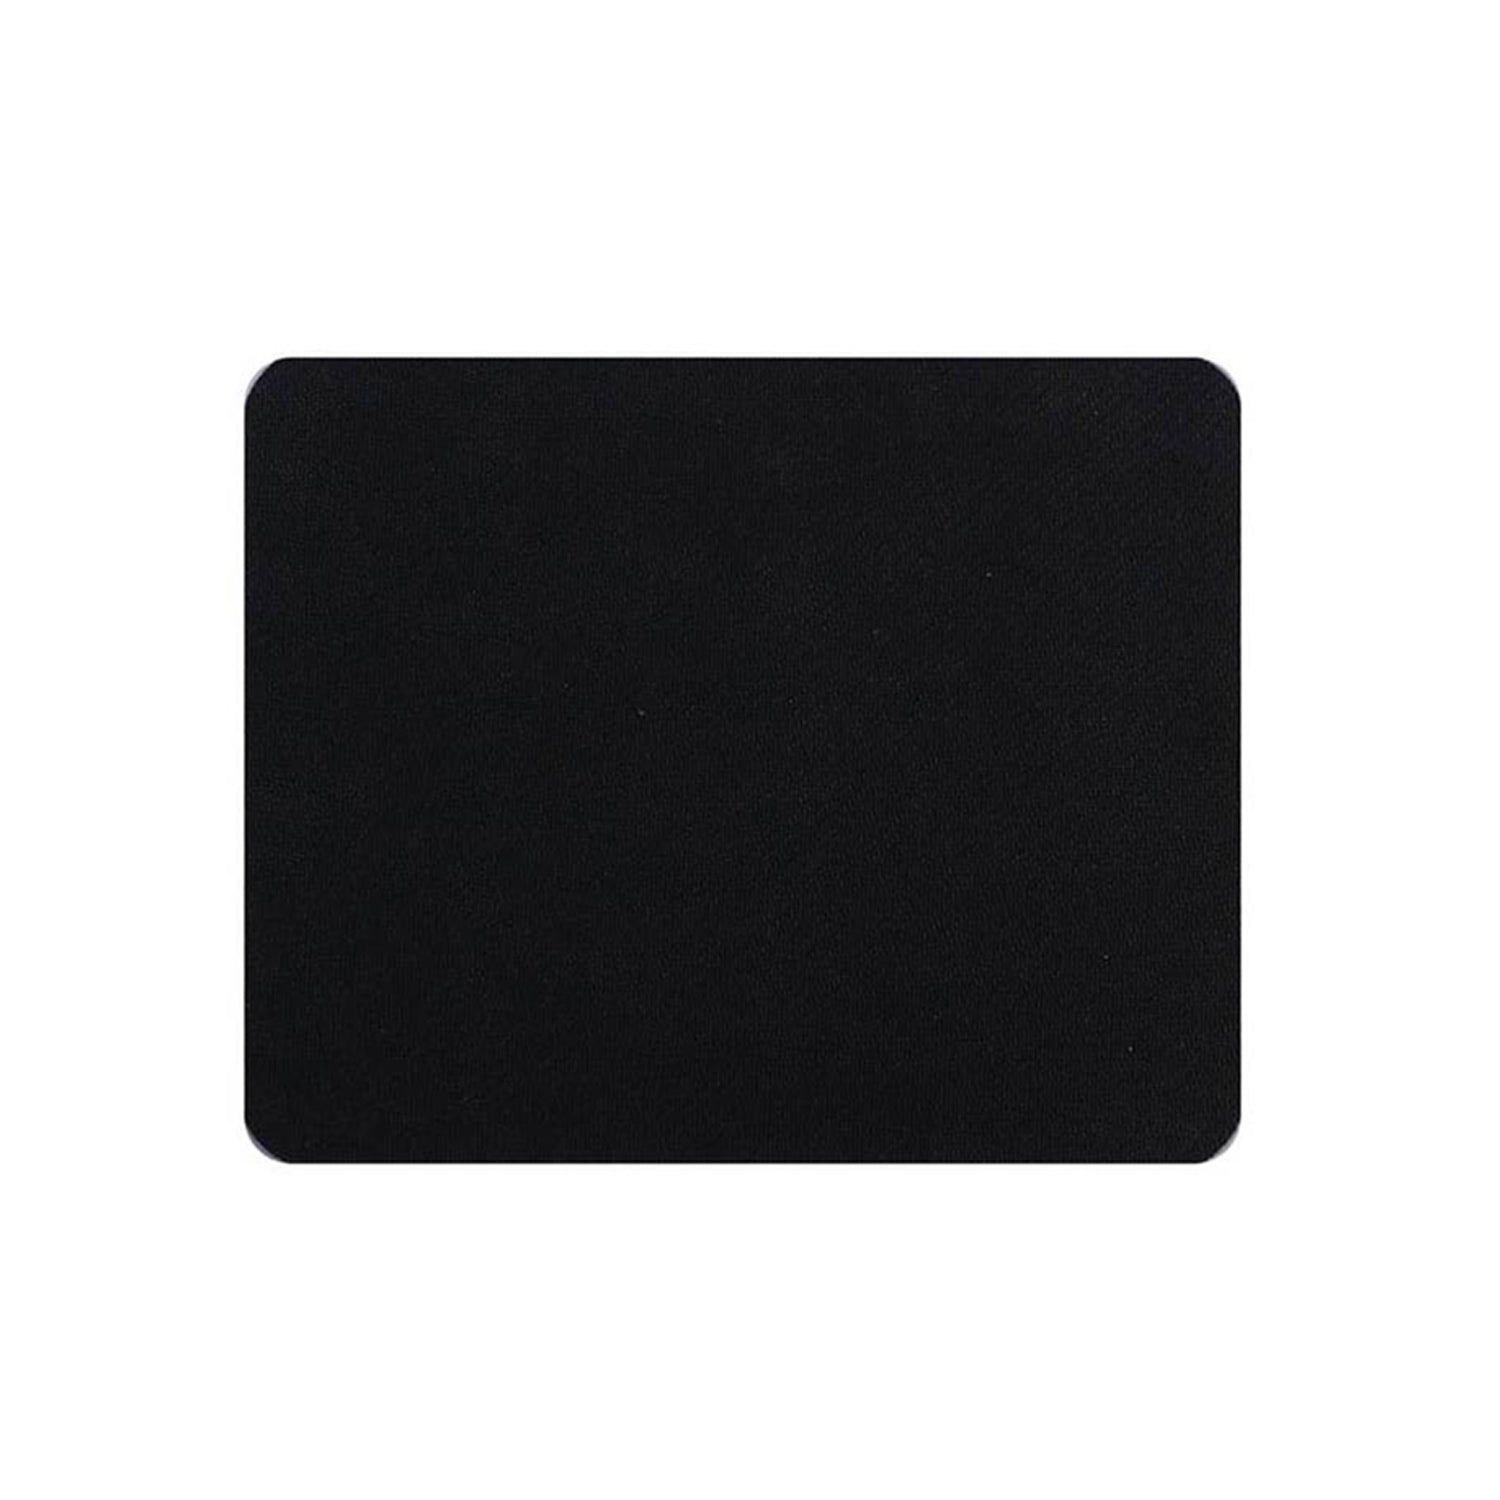 6162 Simple Mouse Pad Used For Mouse While Using Computer